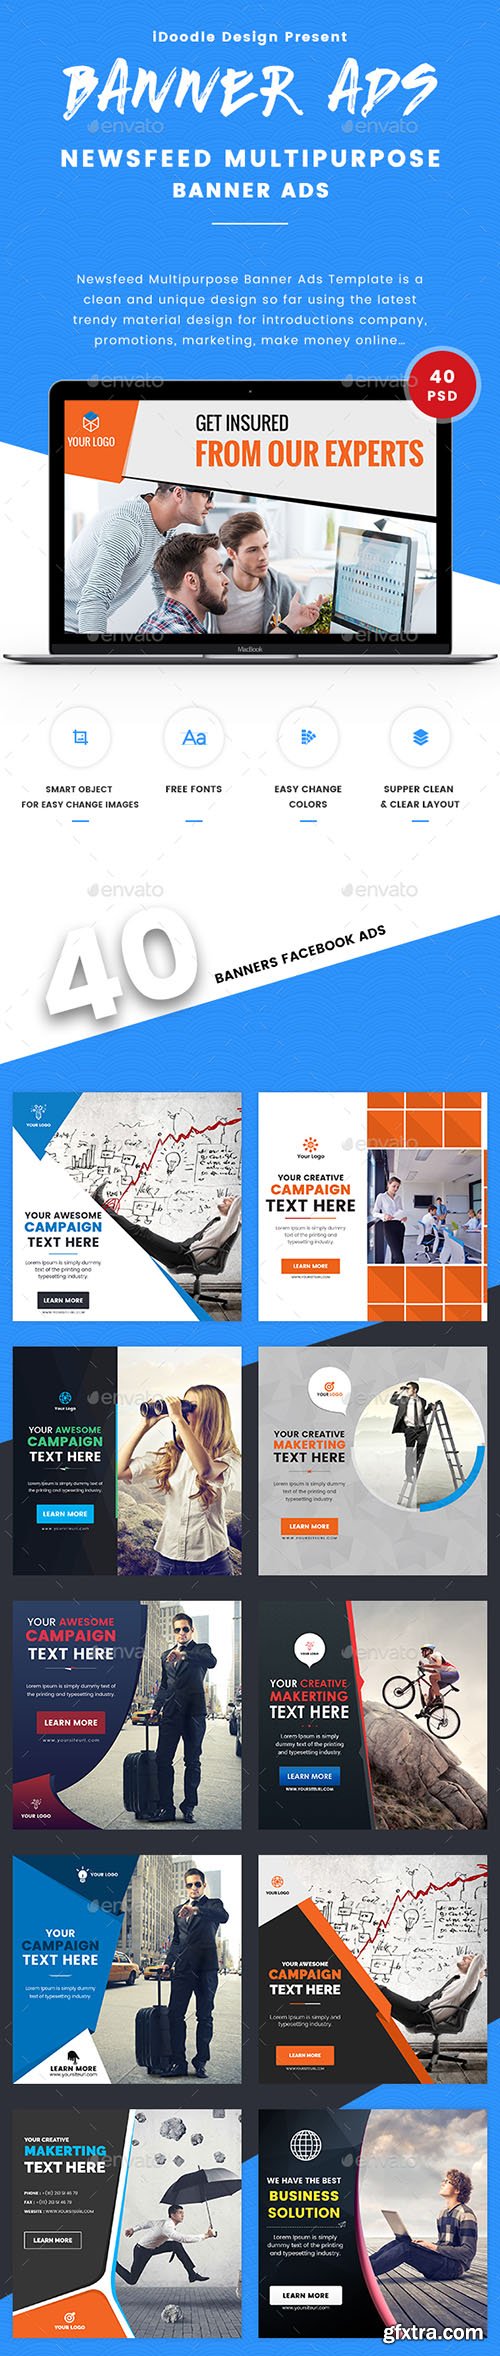 Graphicriver Newsfeed Multipurpose Banner Ads - 40 PSD [02 Size Each] 17049882